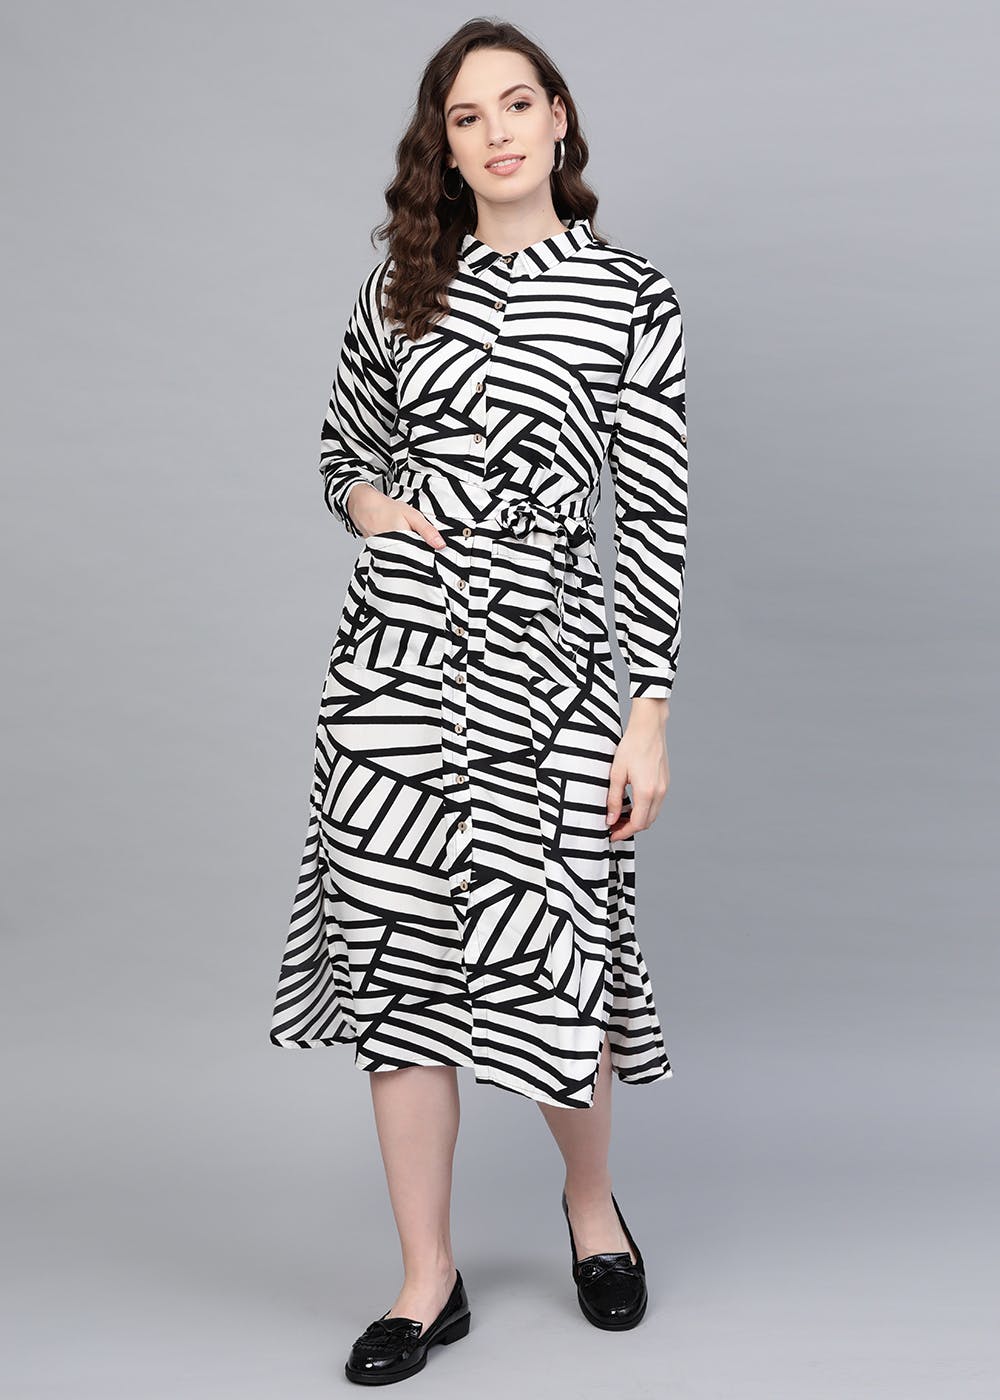 Get Multi Directional Zebra Stripes Printed Button Down Dress at ₹ 625 ...